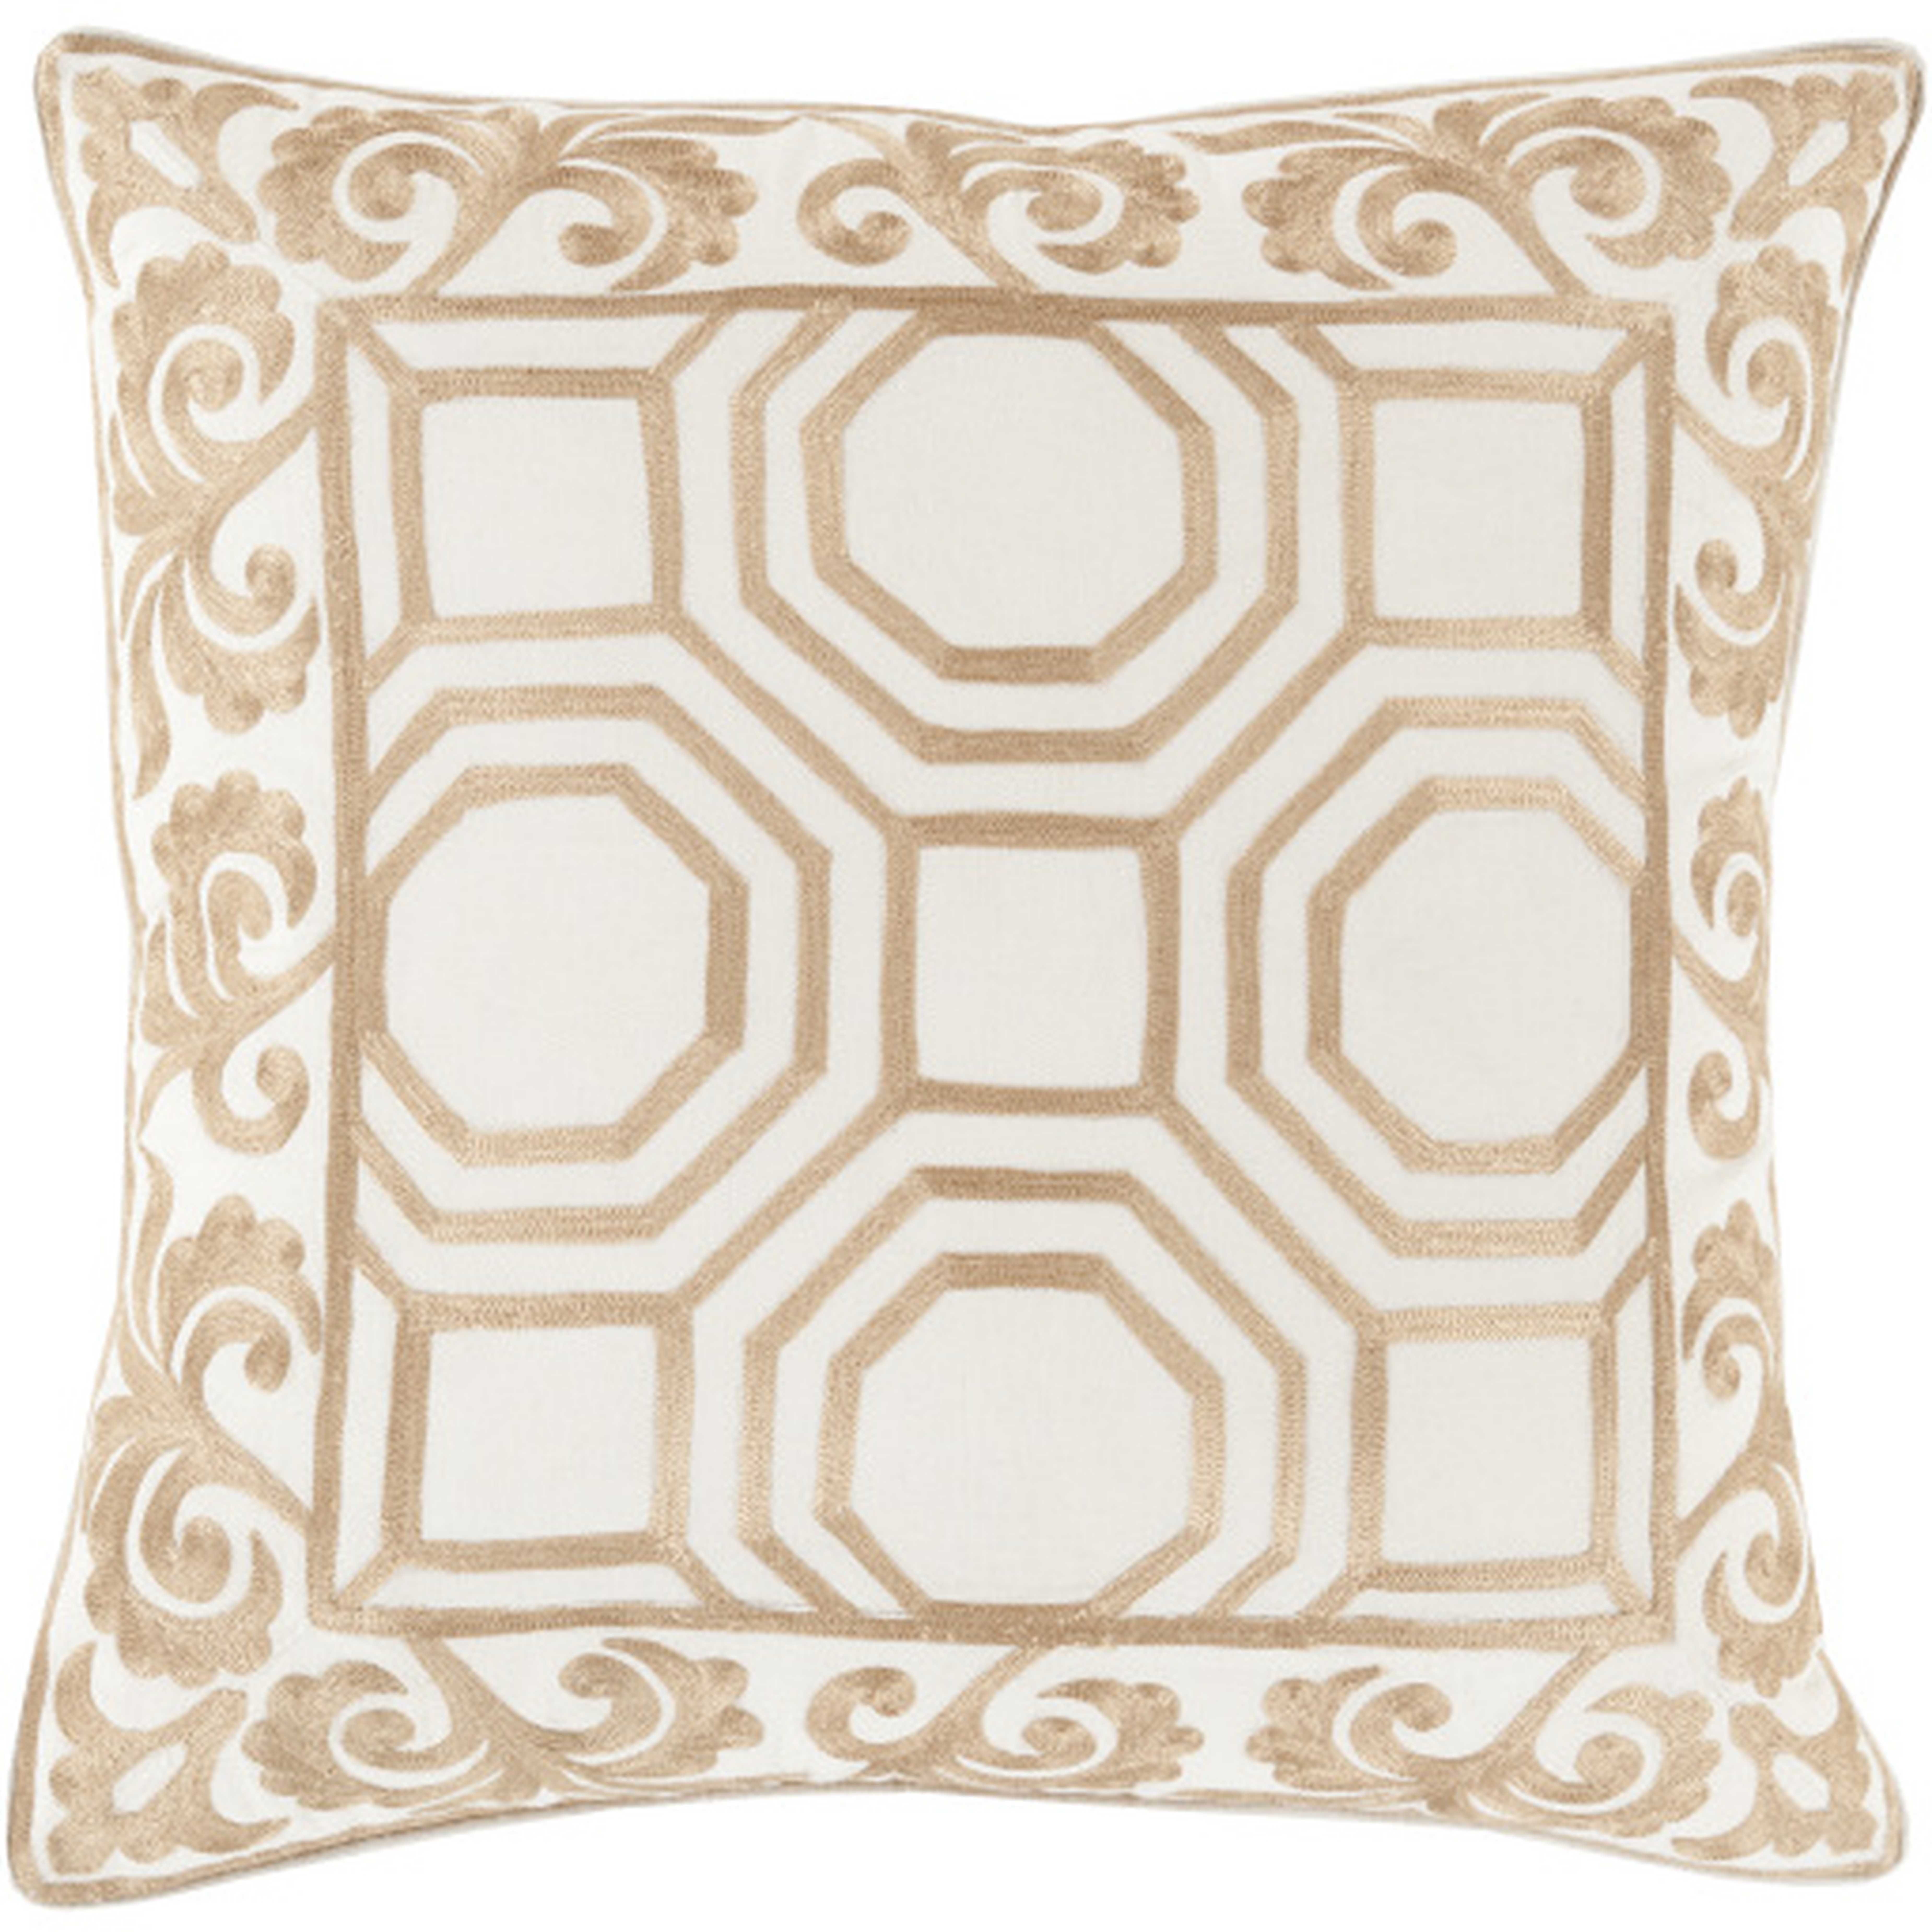 Bel Ami Throw Pillow, 18" x 18", pillow cover only - Surya